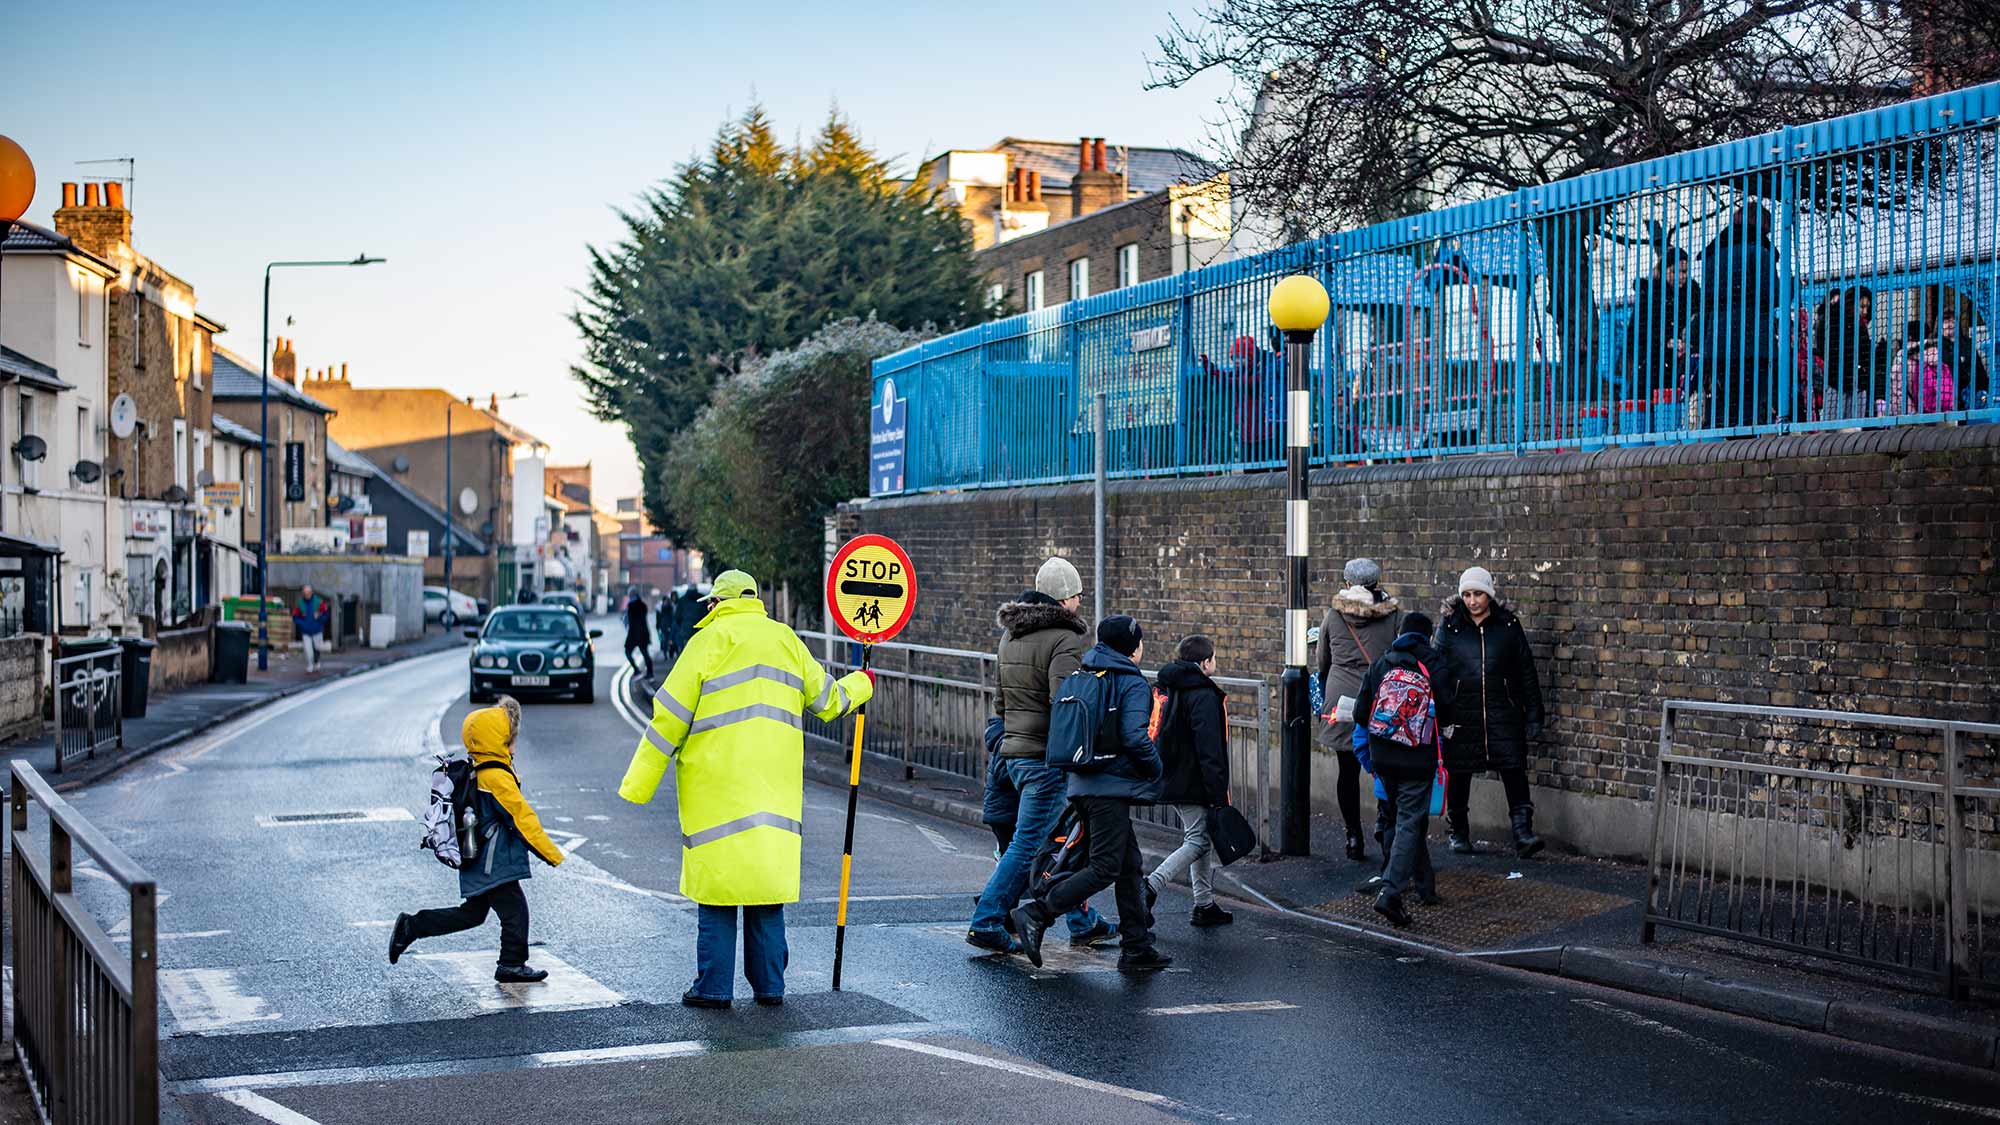 Children crossing the road on a pedestrian crossing